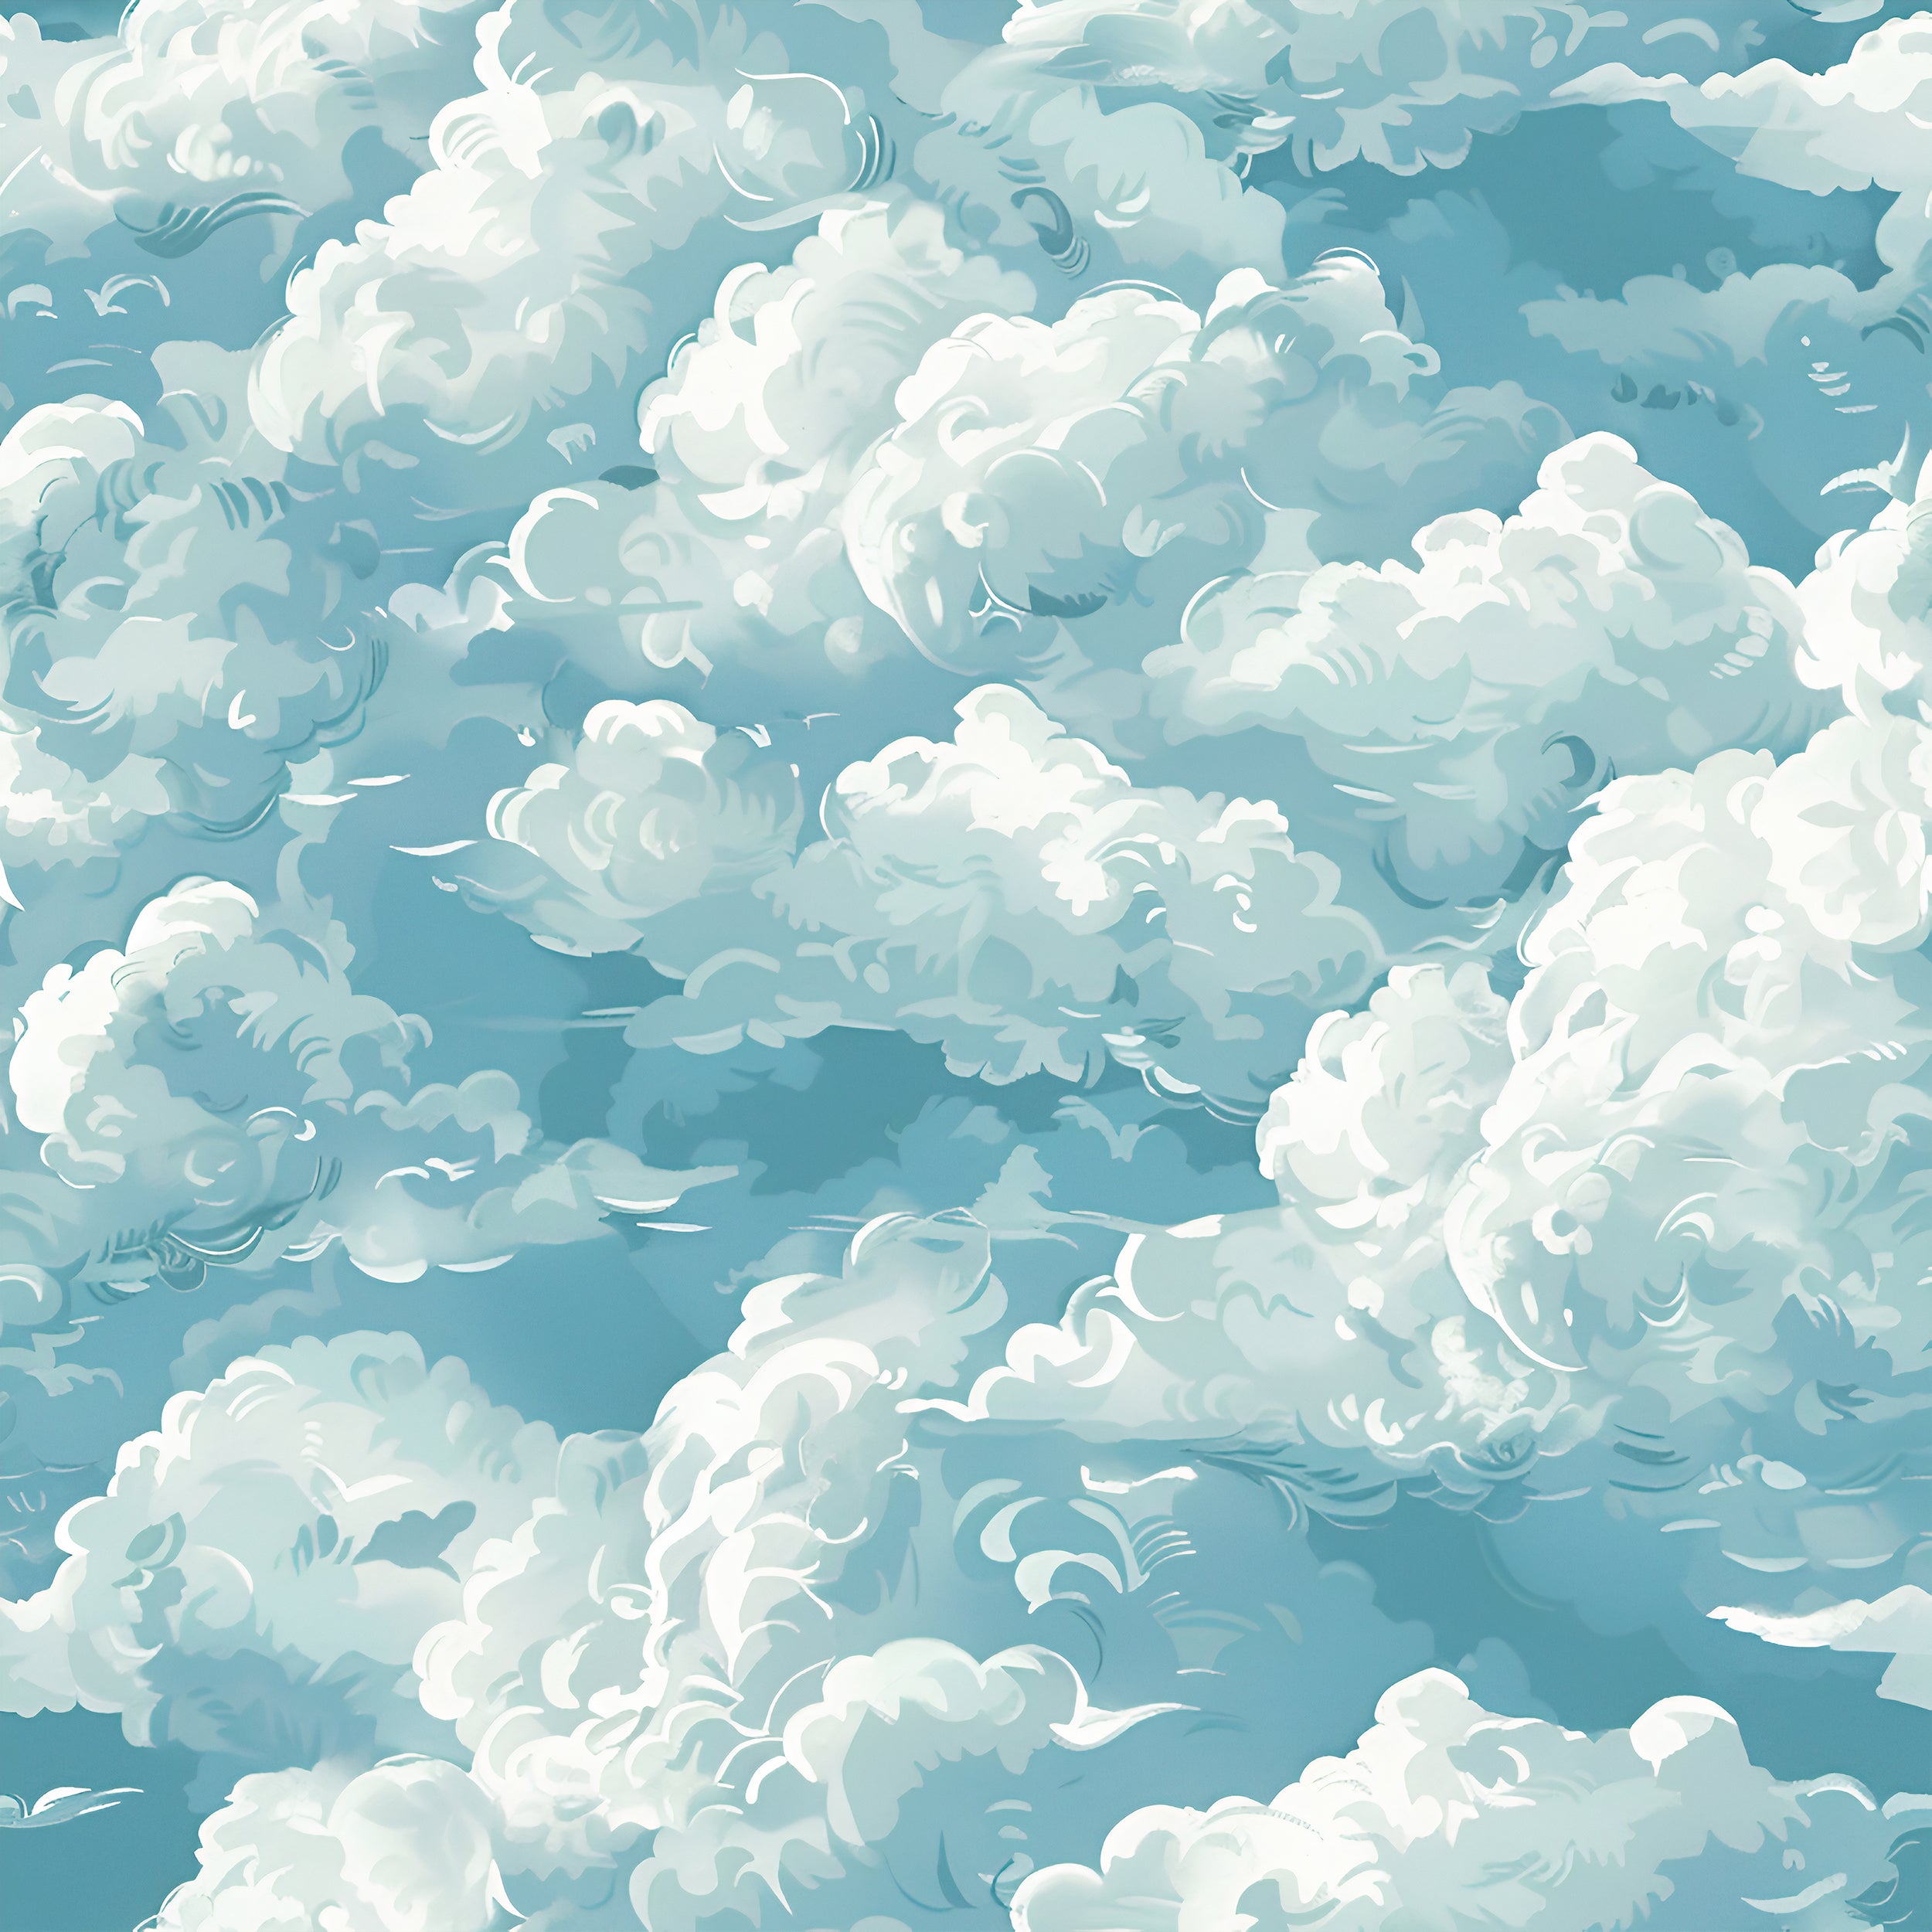 Blue and white clouds wallpaper for nursery Watercolor cloud pattern wall decor